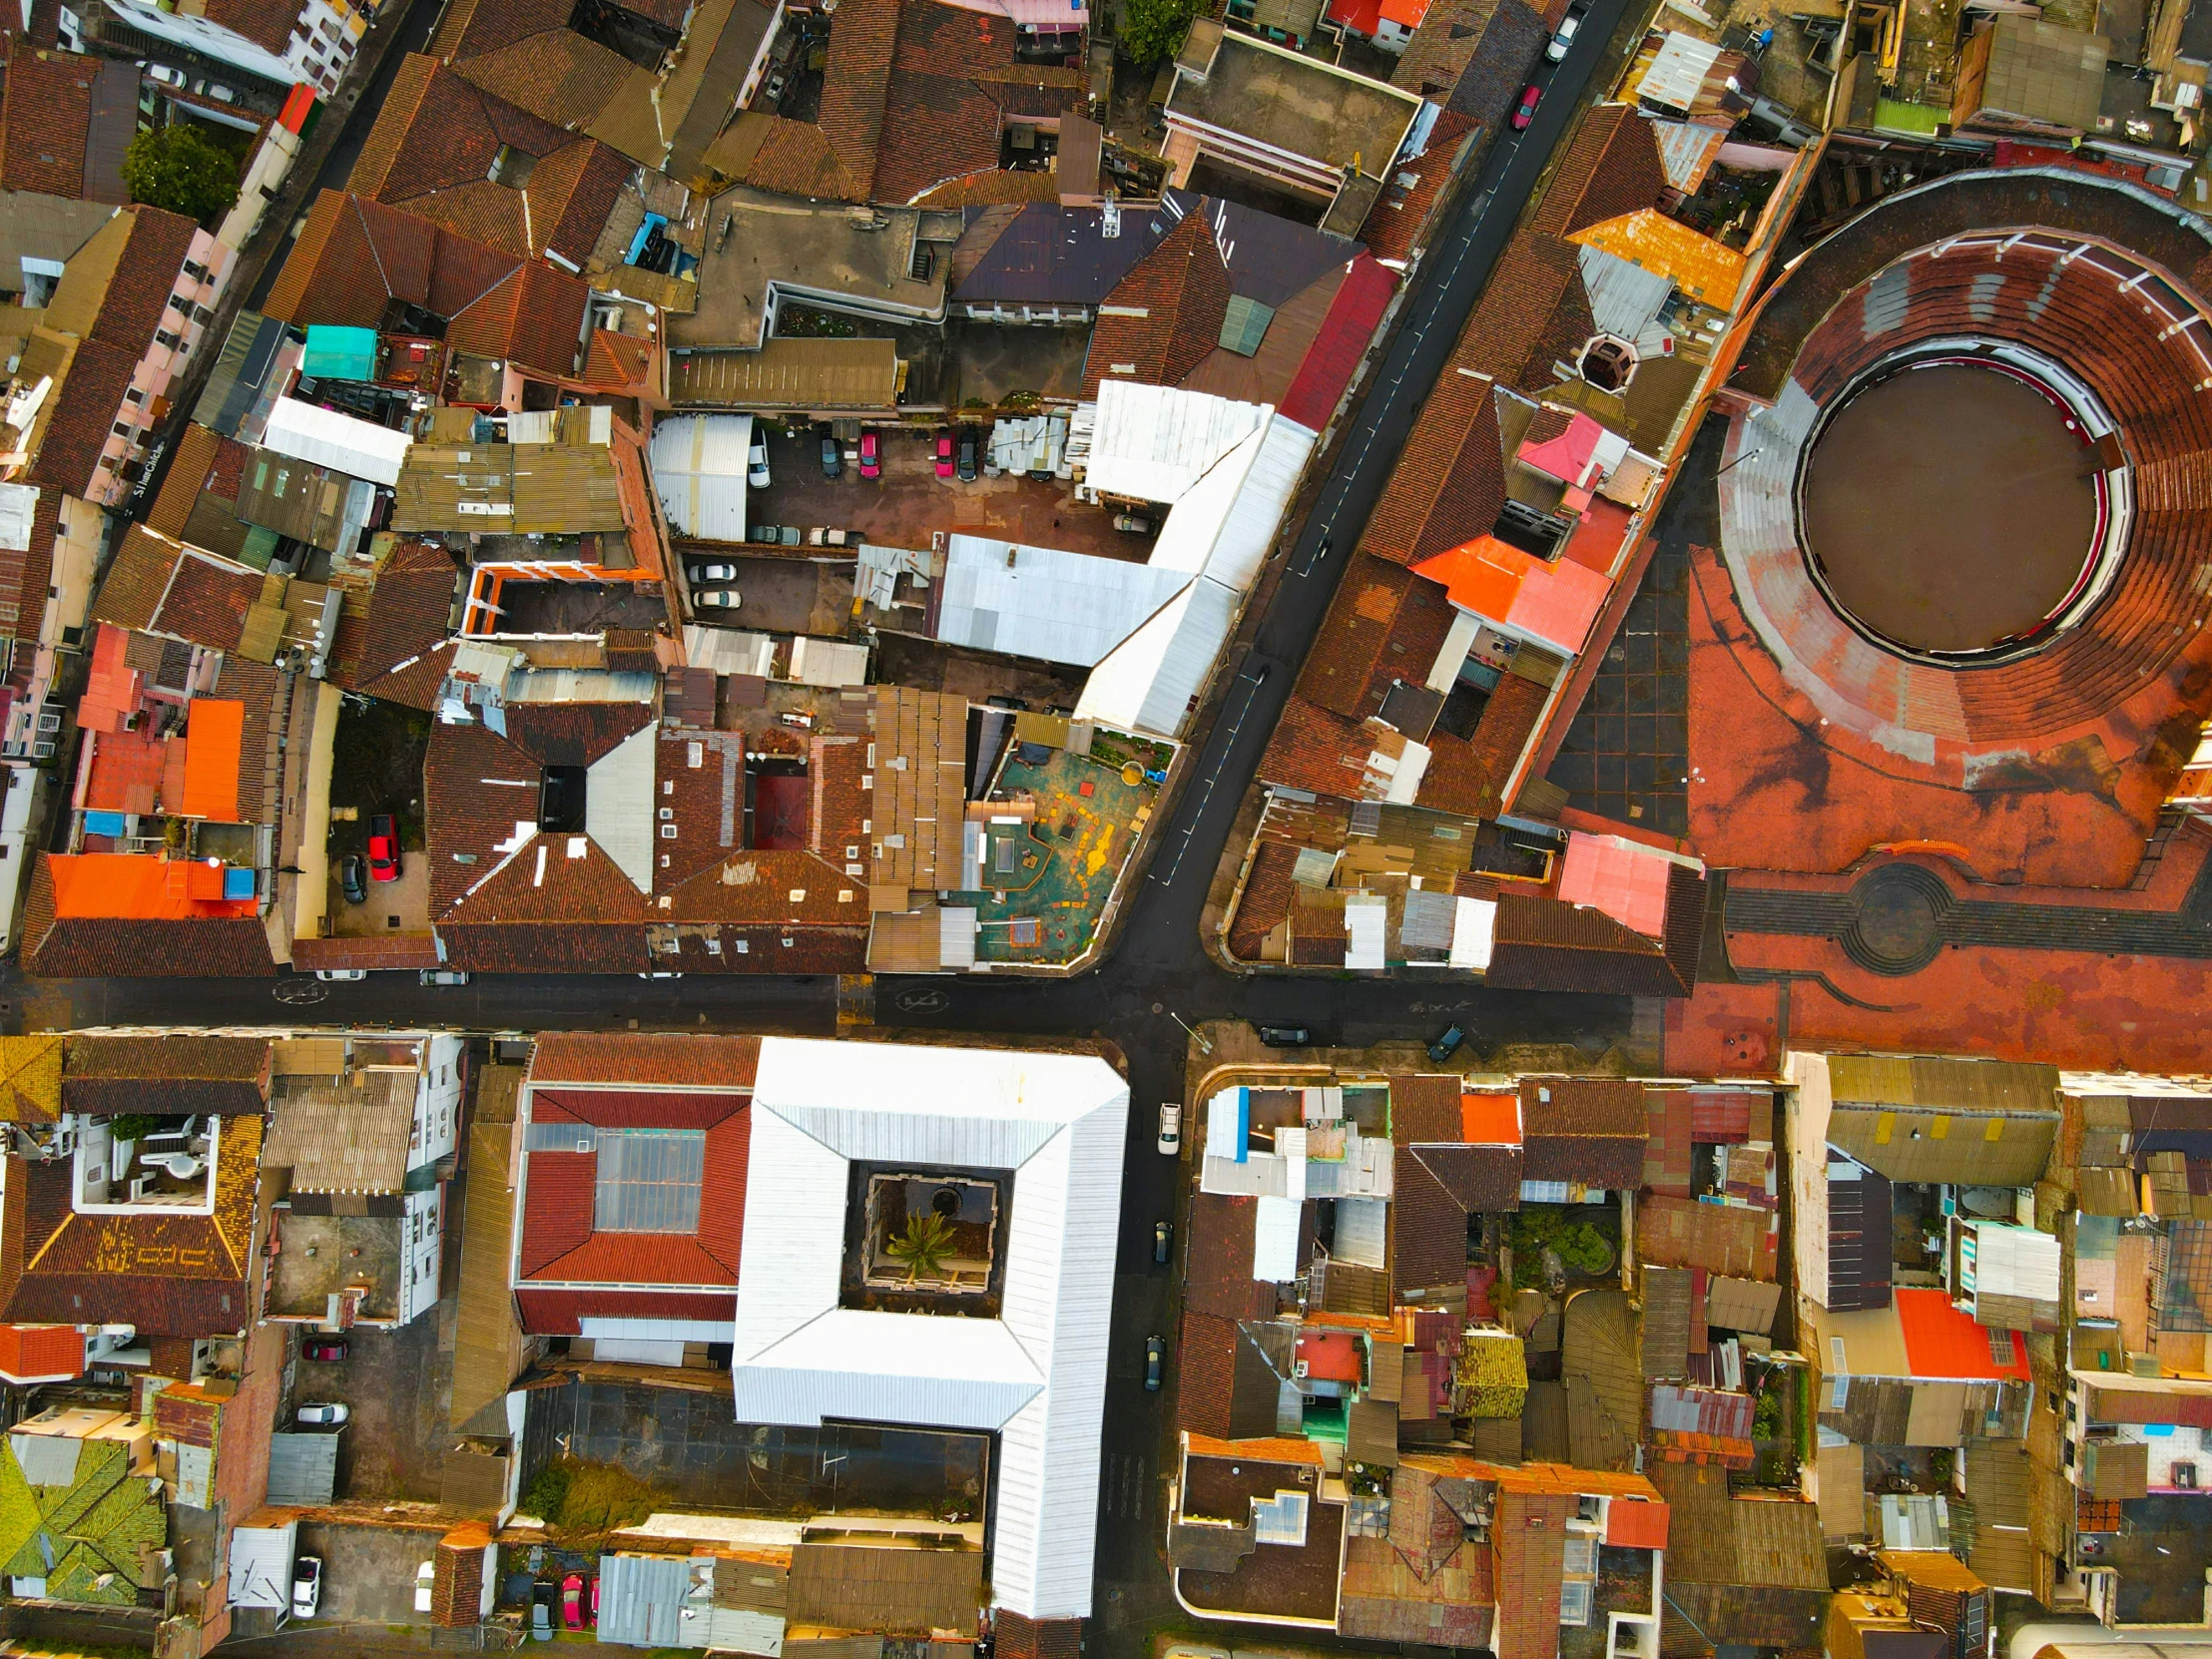 an overhead view of an urban area with houses and roofs